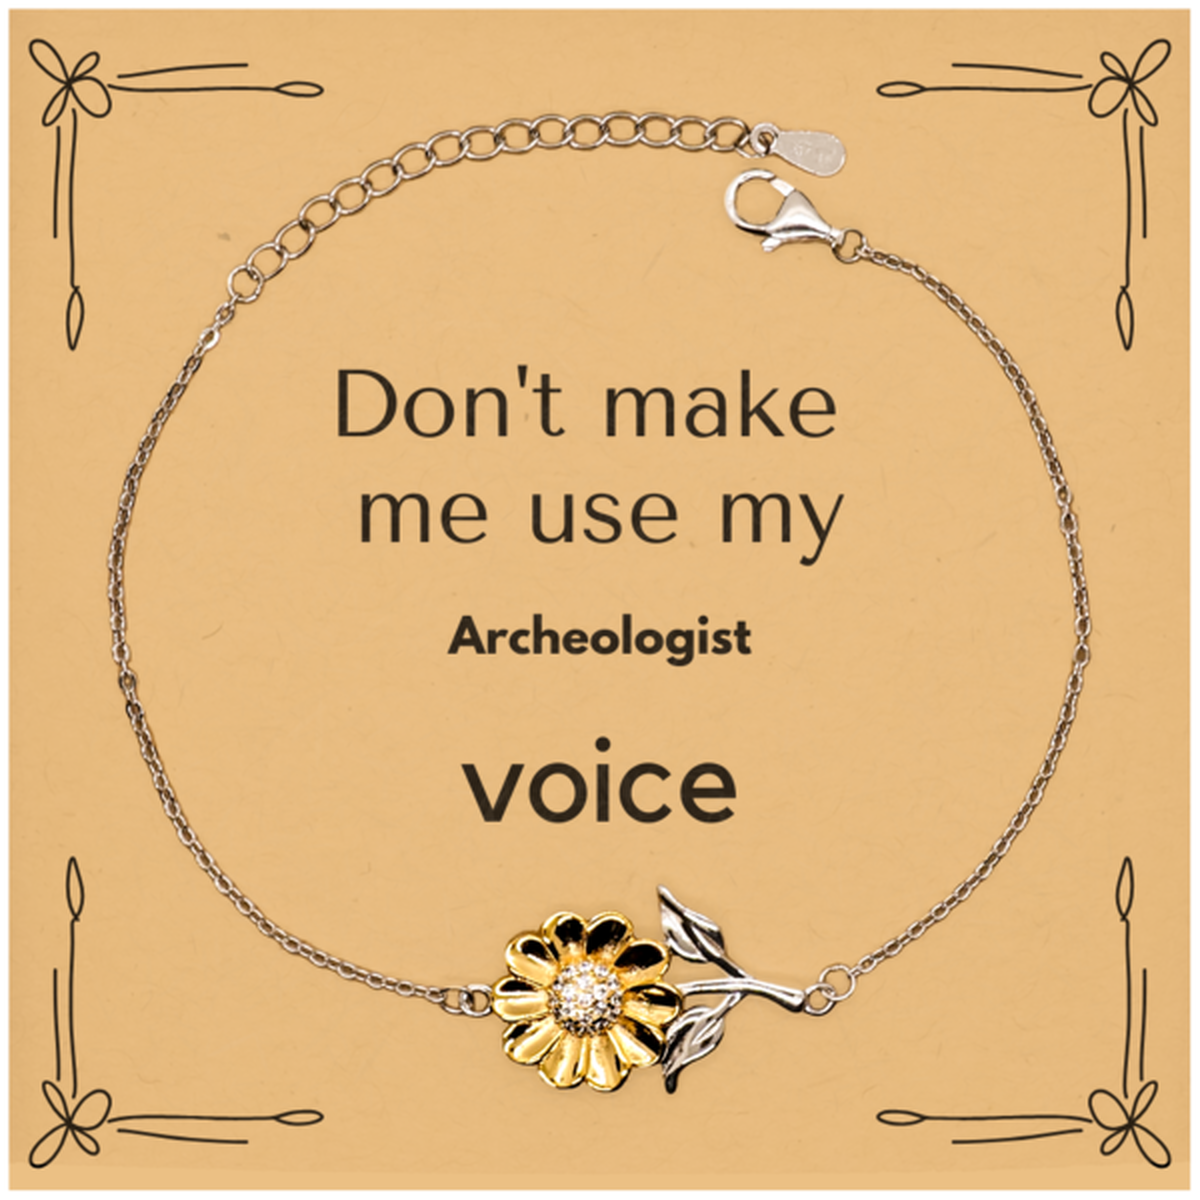 Don't make me use my Archeologist voice, Sarcasm Archeologist Card Gifts, Christmas Archeologist Sunflower Bracelet Birthday Unique Gifts For Archeologist Coworkers, Men, Women, Colleague, Friends